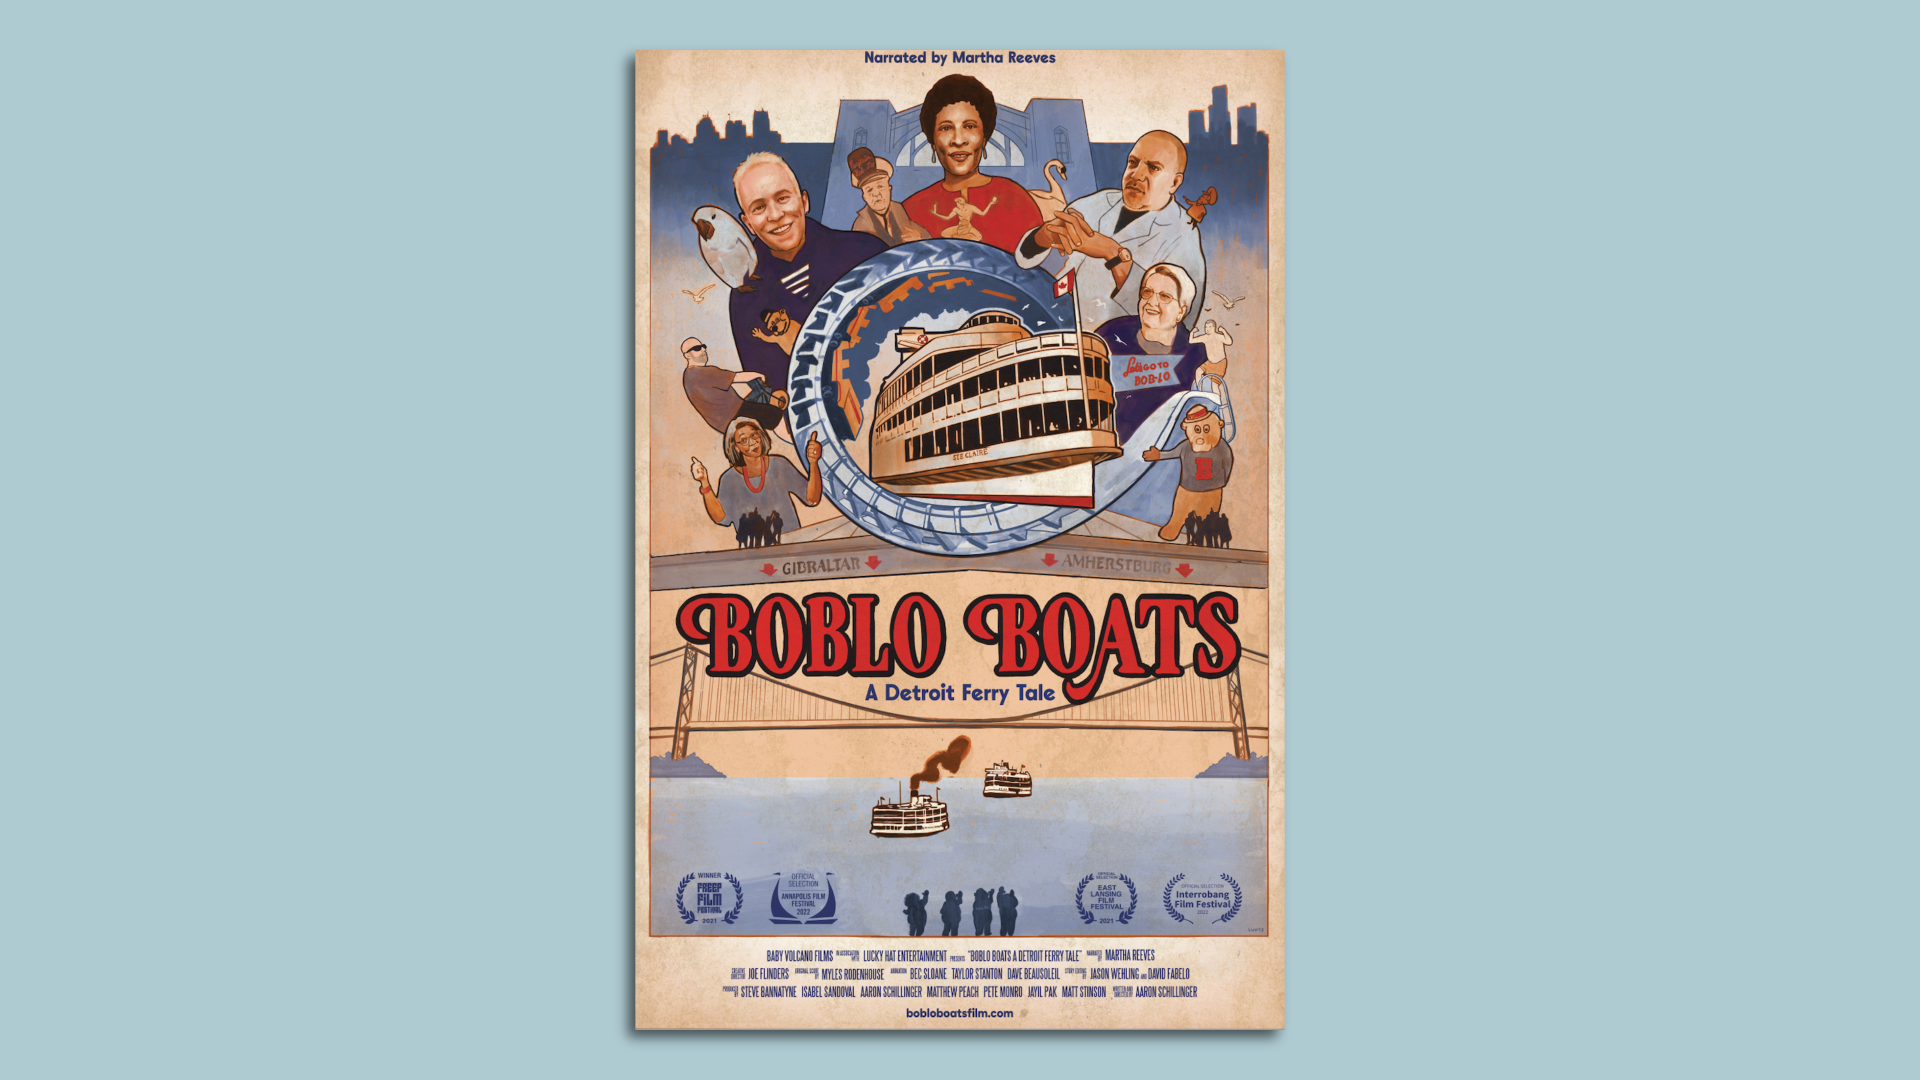 A poster for the documentary is shown, in a vintage style with a boat in the center and characters all around. 